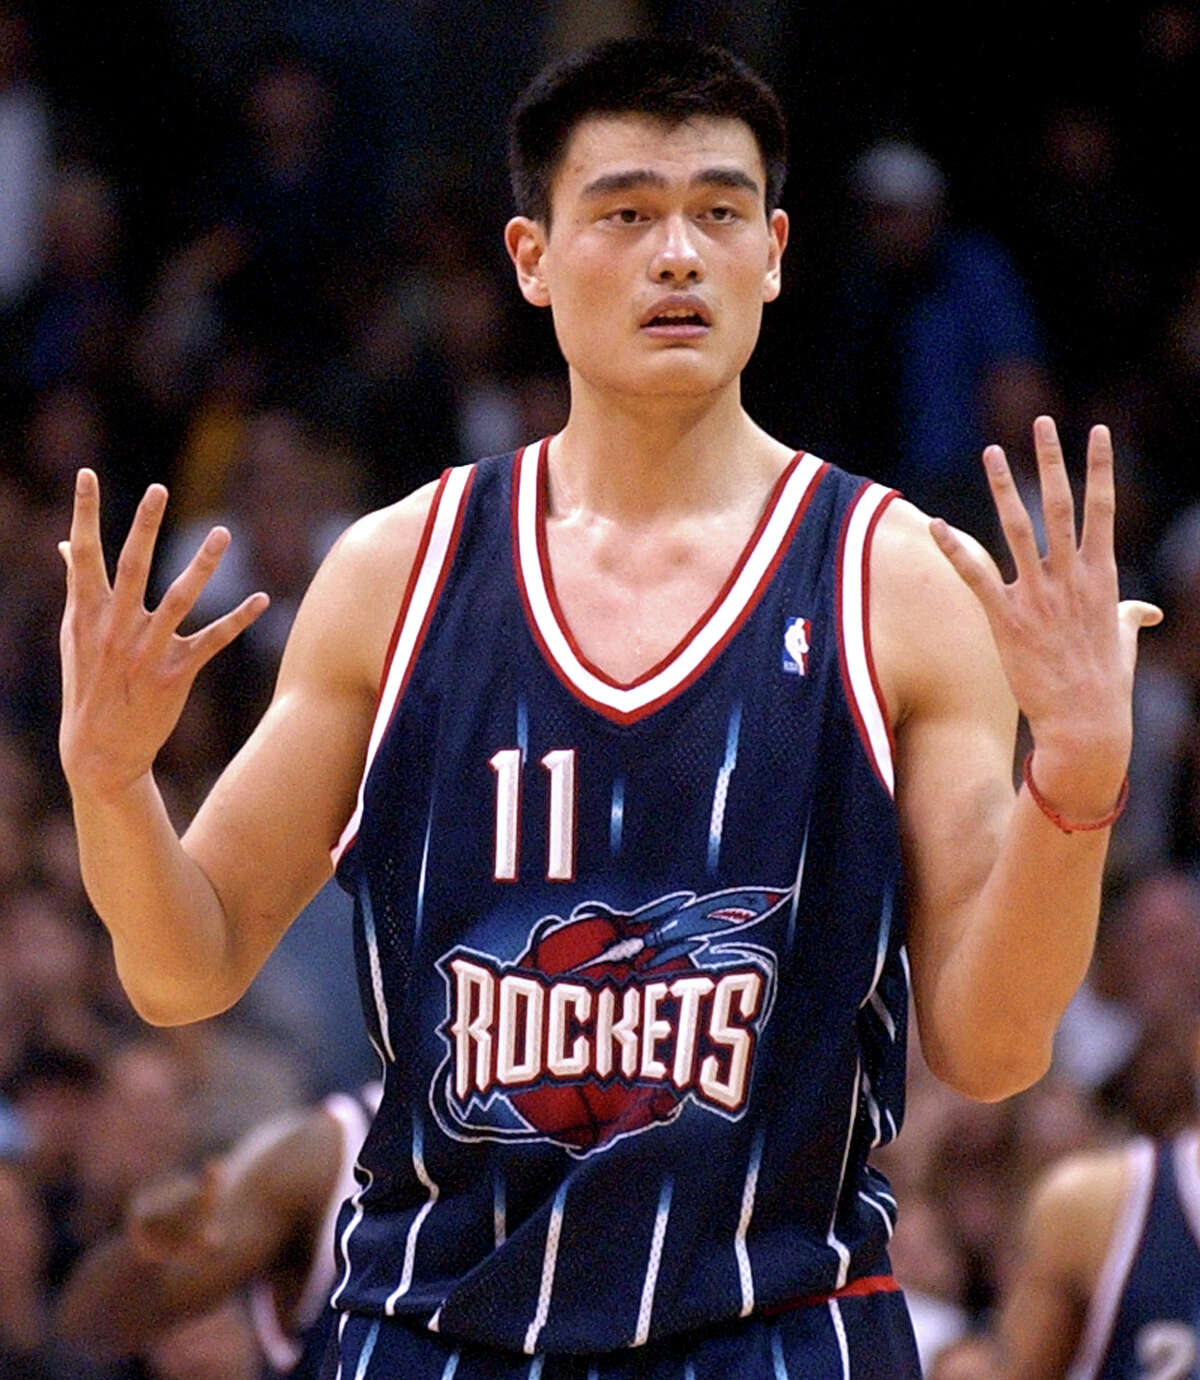 Houston Rockets' Yao Ming protests to a referee after fouling out during the first overtime of the Rockets' 106-99 double overtime loss to the Los Angeles Lakers at Staples Center in Los Angeles, Tuesday, Feb. 18, 2003. (AP Photo/Chris Pizzello)